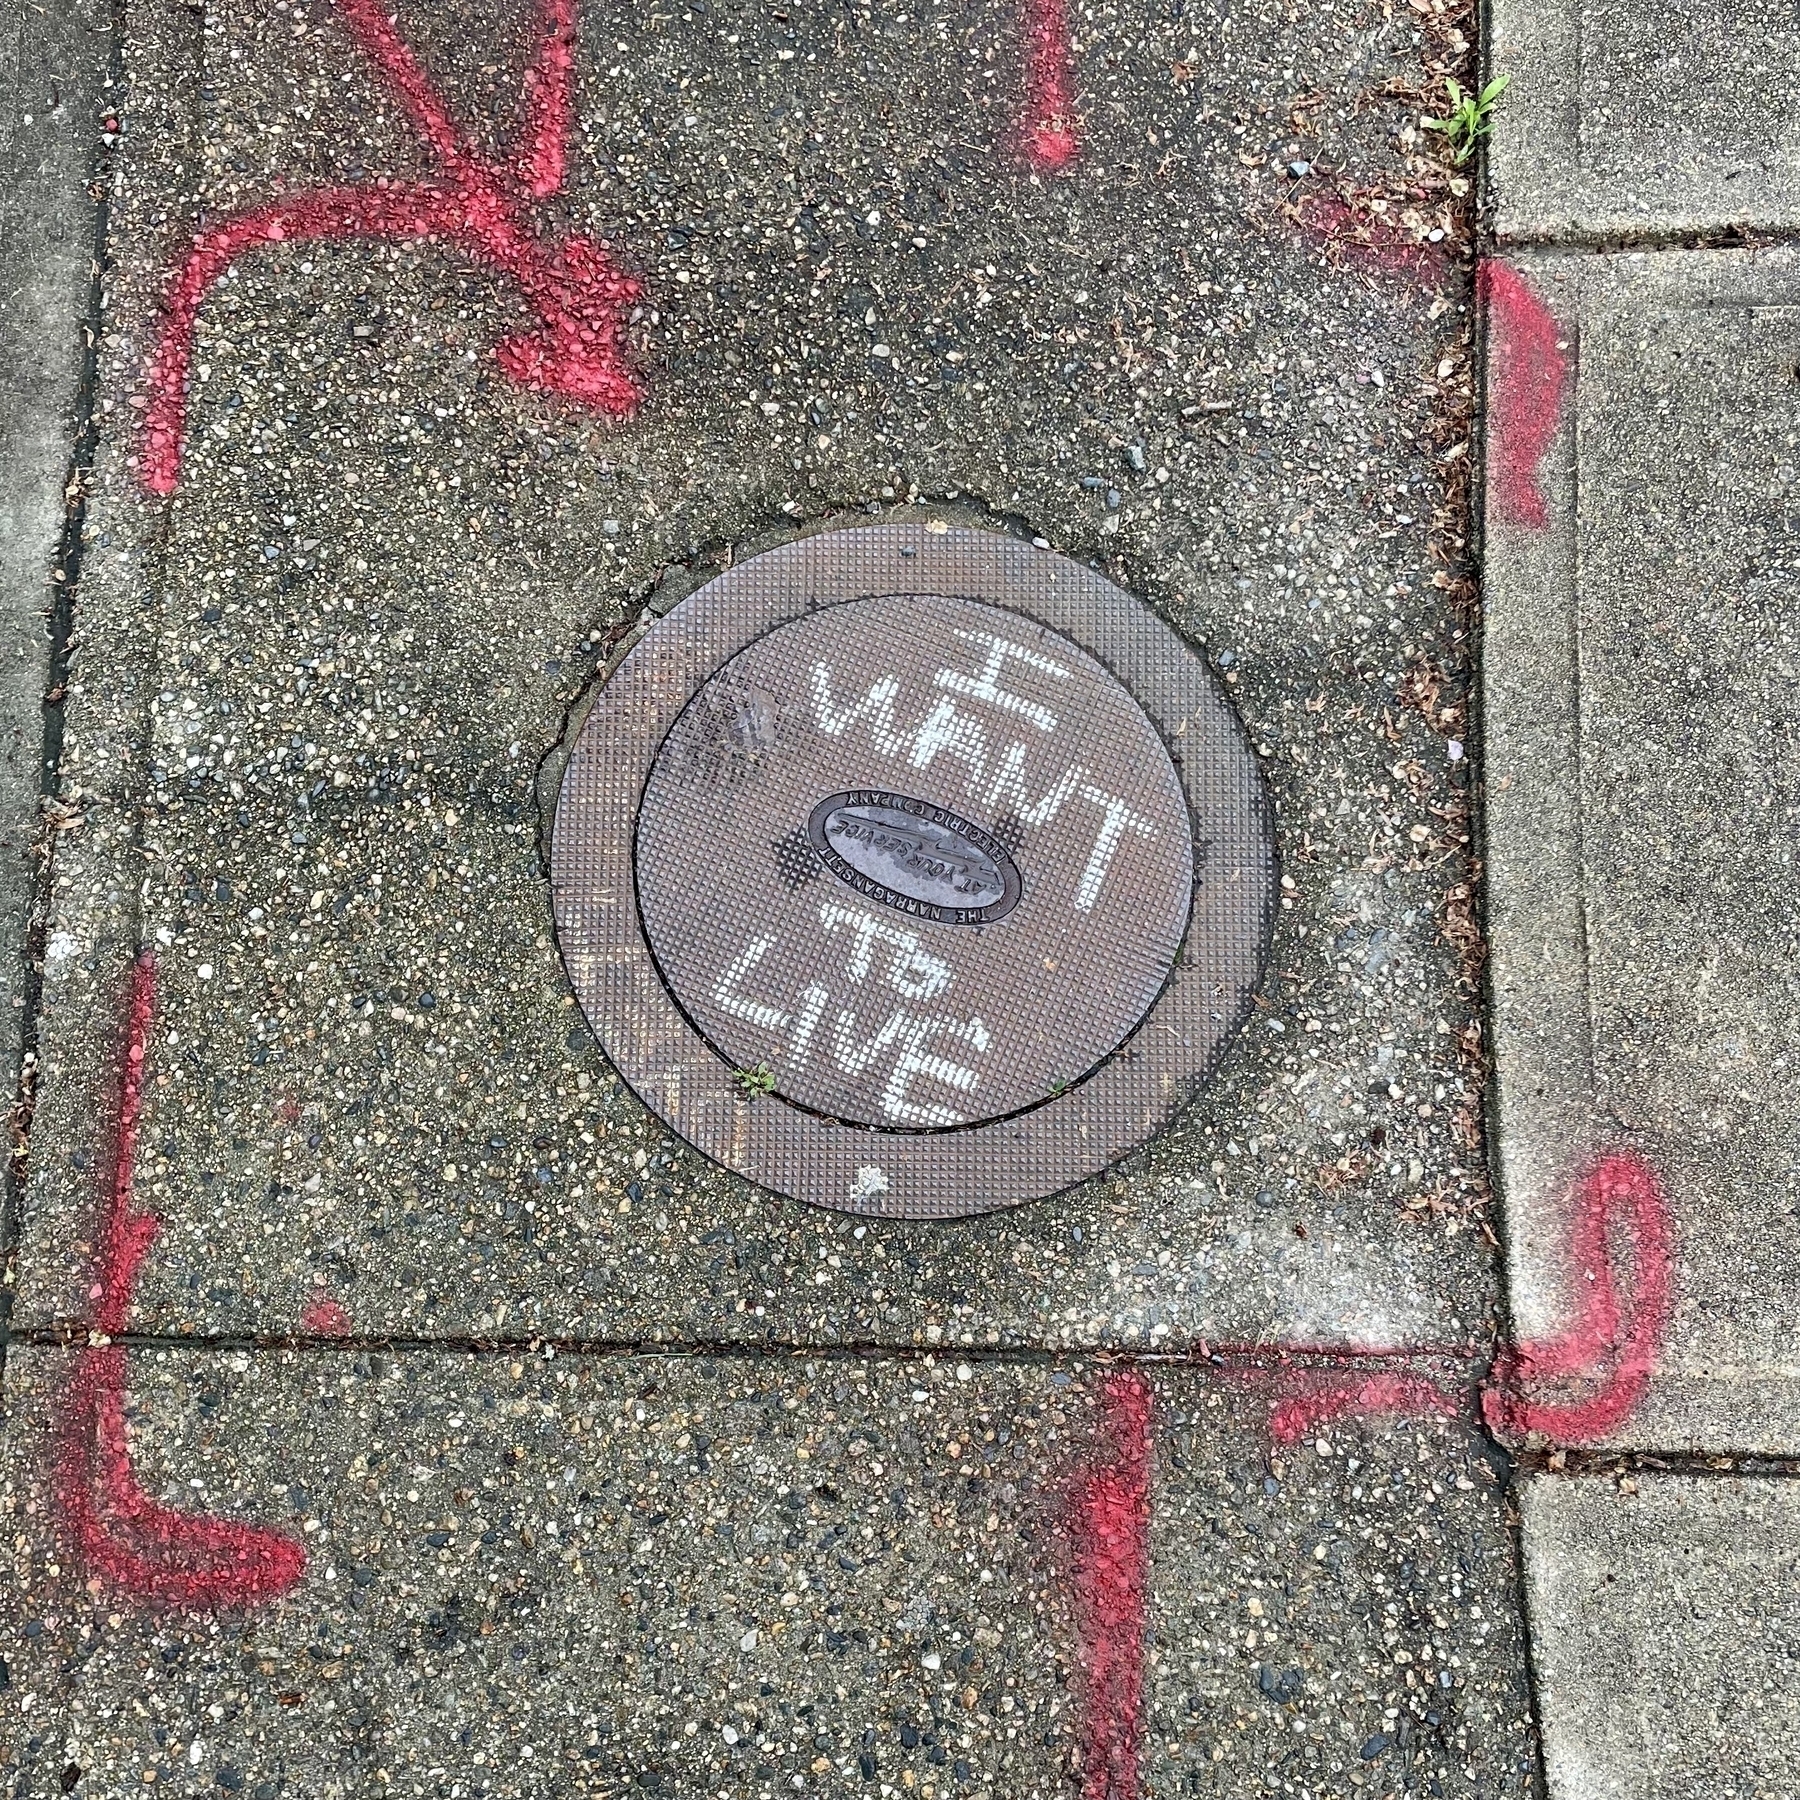 Looking down on a sidewalk, a utility hole cover is surrounded by several spray-painted red lines. On the cover is spray painted in white, “I WANT TO LIVE”.